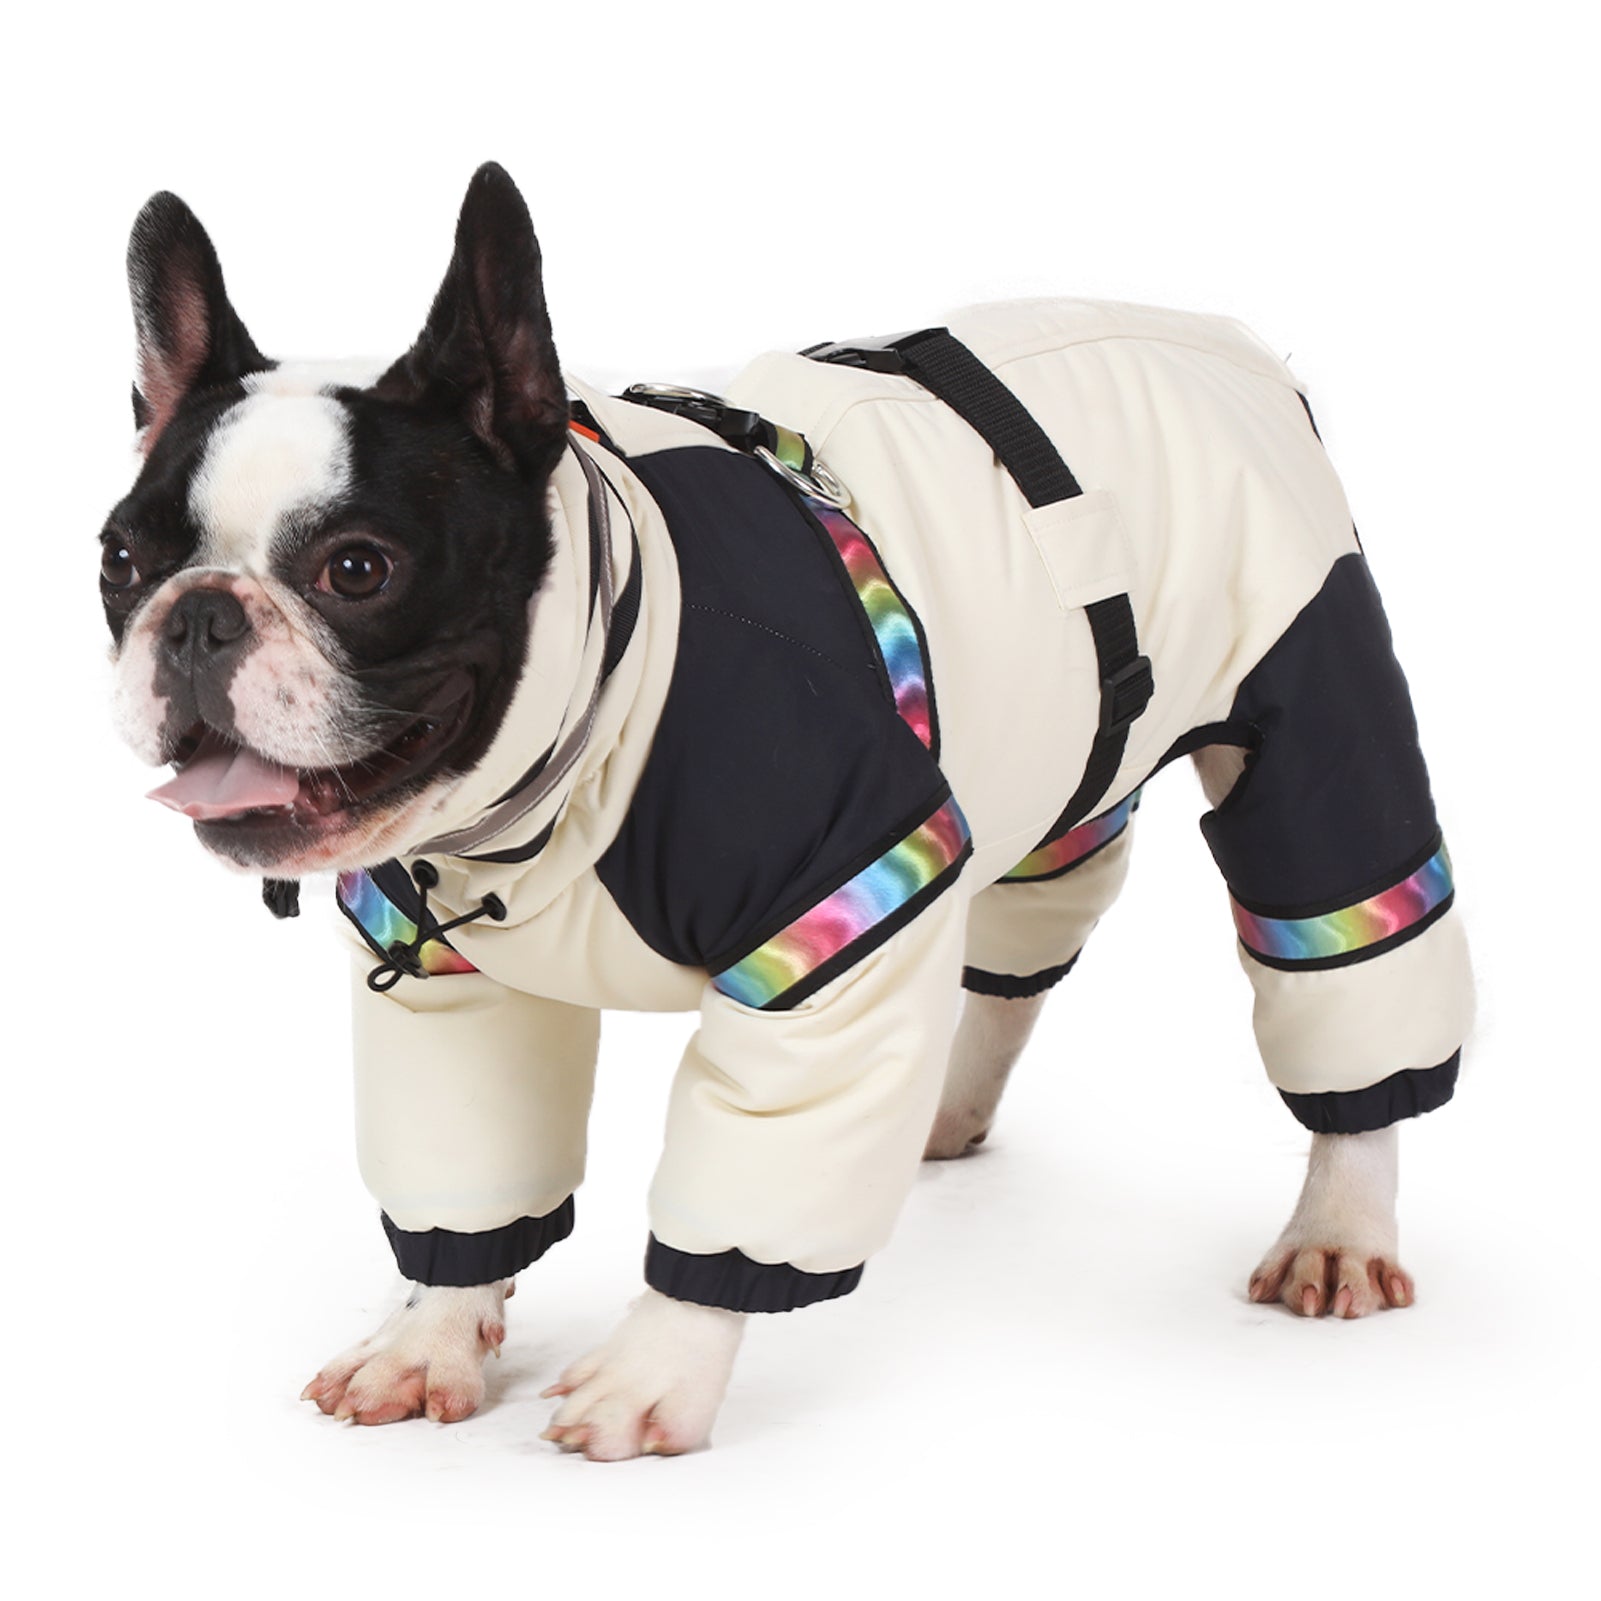 Laifug Panda Four Legs Cotton Dog Coats for Small to Extra Large Dogs